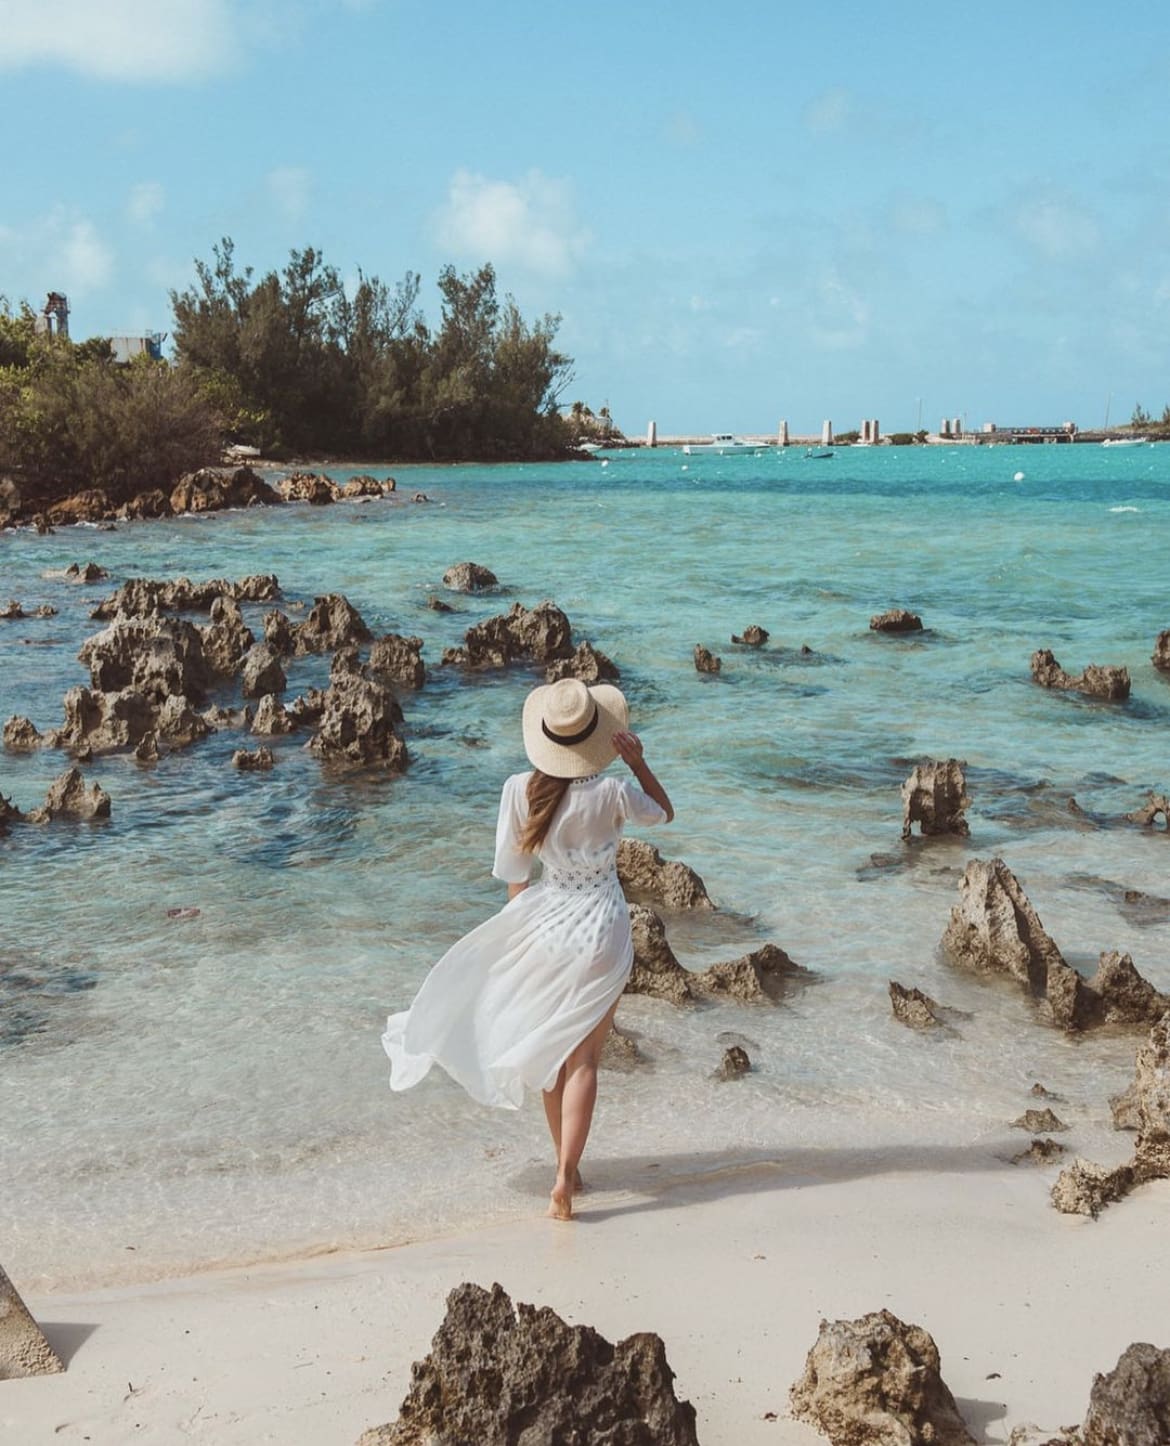 Grotto Bay - The 12 Best Beaches in the Bahamas